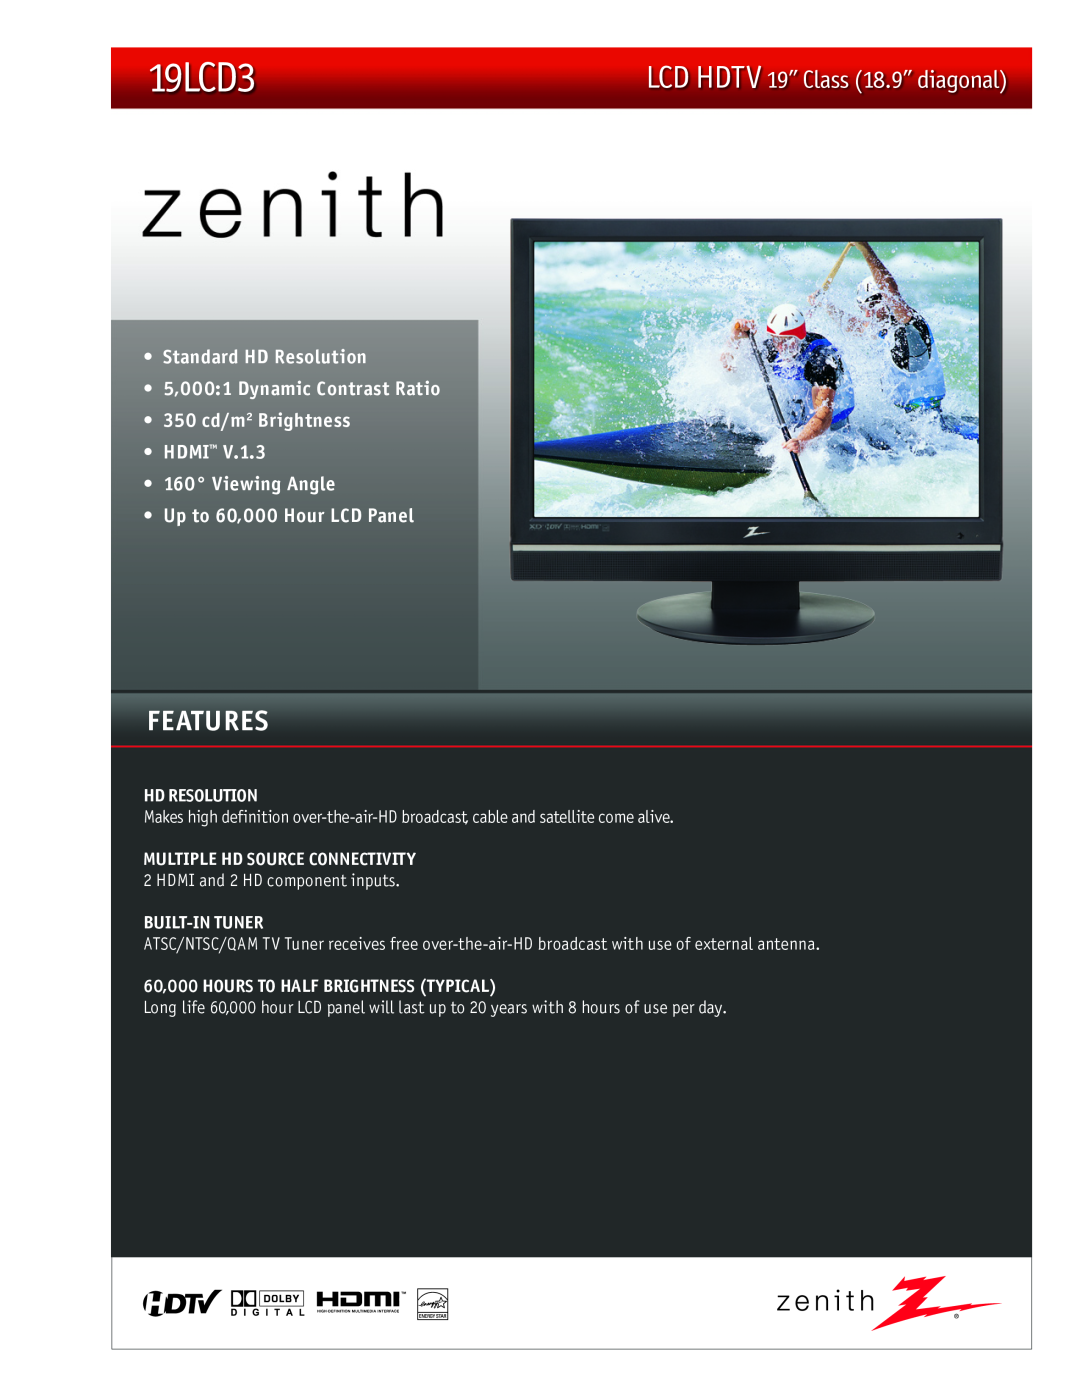 Zenith 19LCD3 manual HD Resolution, Built-In Tuner, 60,000 HOURS TO HALF BRIGHTNESS TYPICAL, Features 